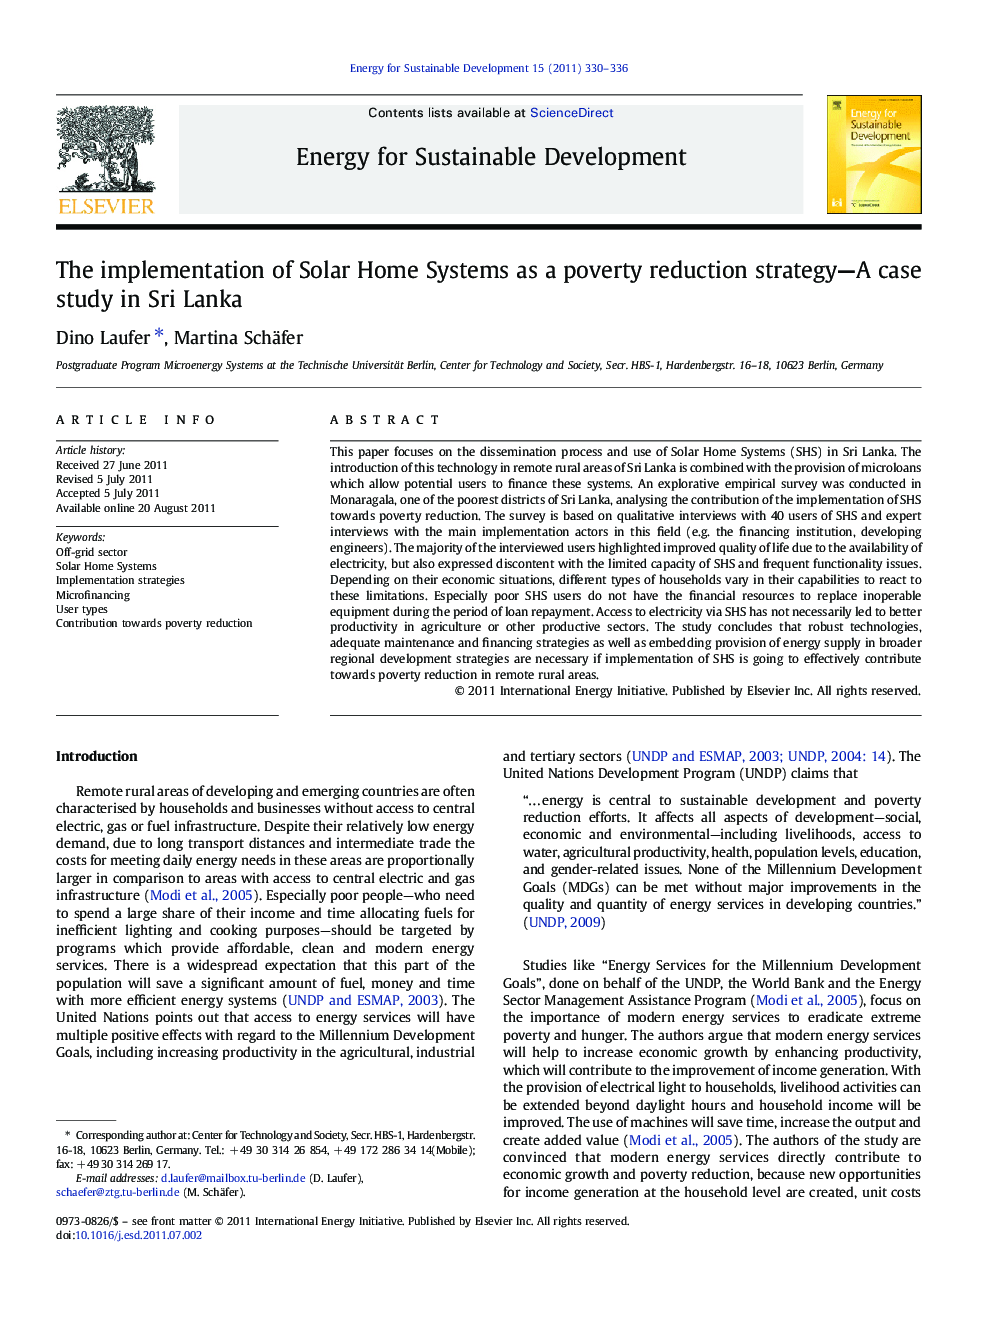 The implementation of Solar Home Systems as a poverty reduction strategy—A case study in Sri Lanka